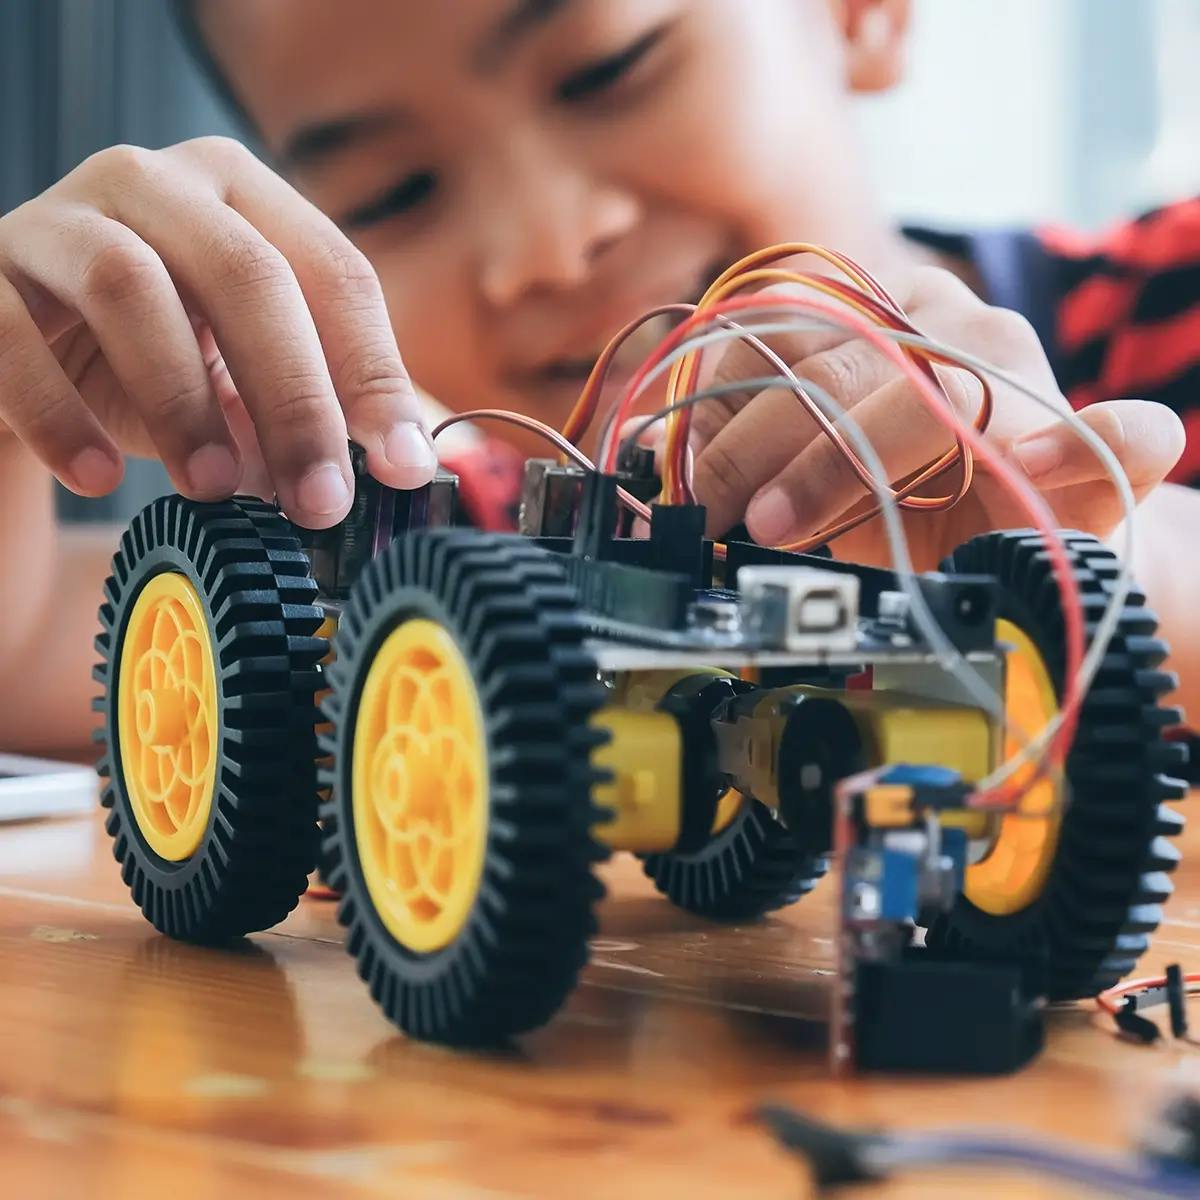 Child playing with STEM toy - robotic car kit